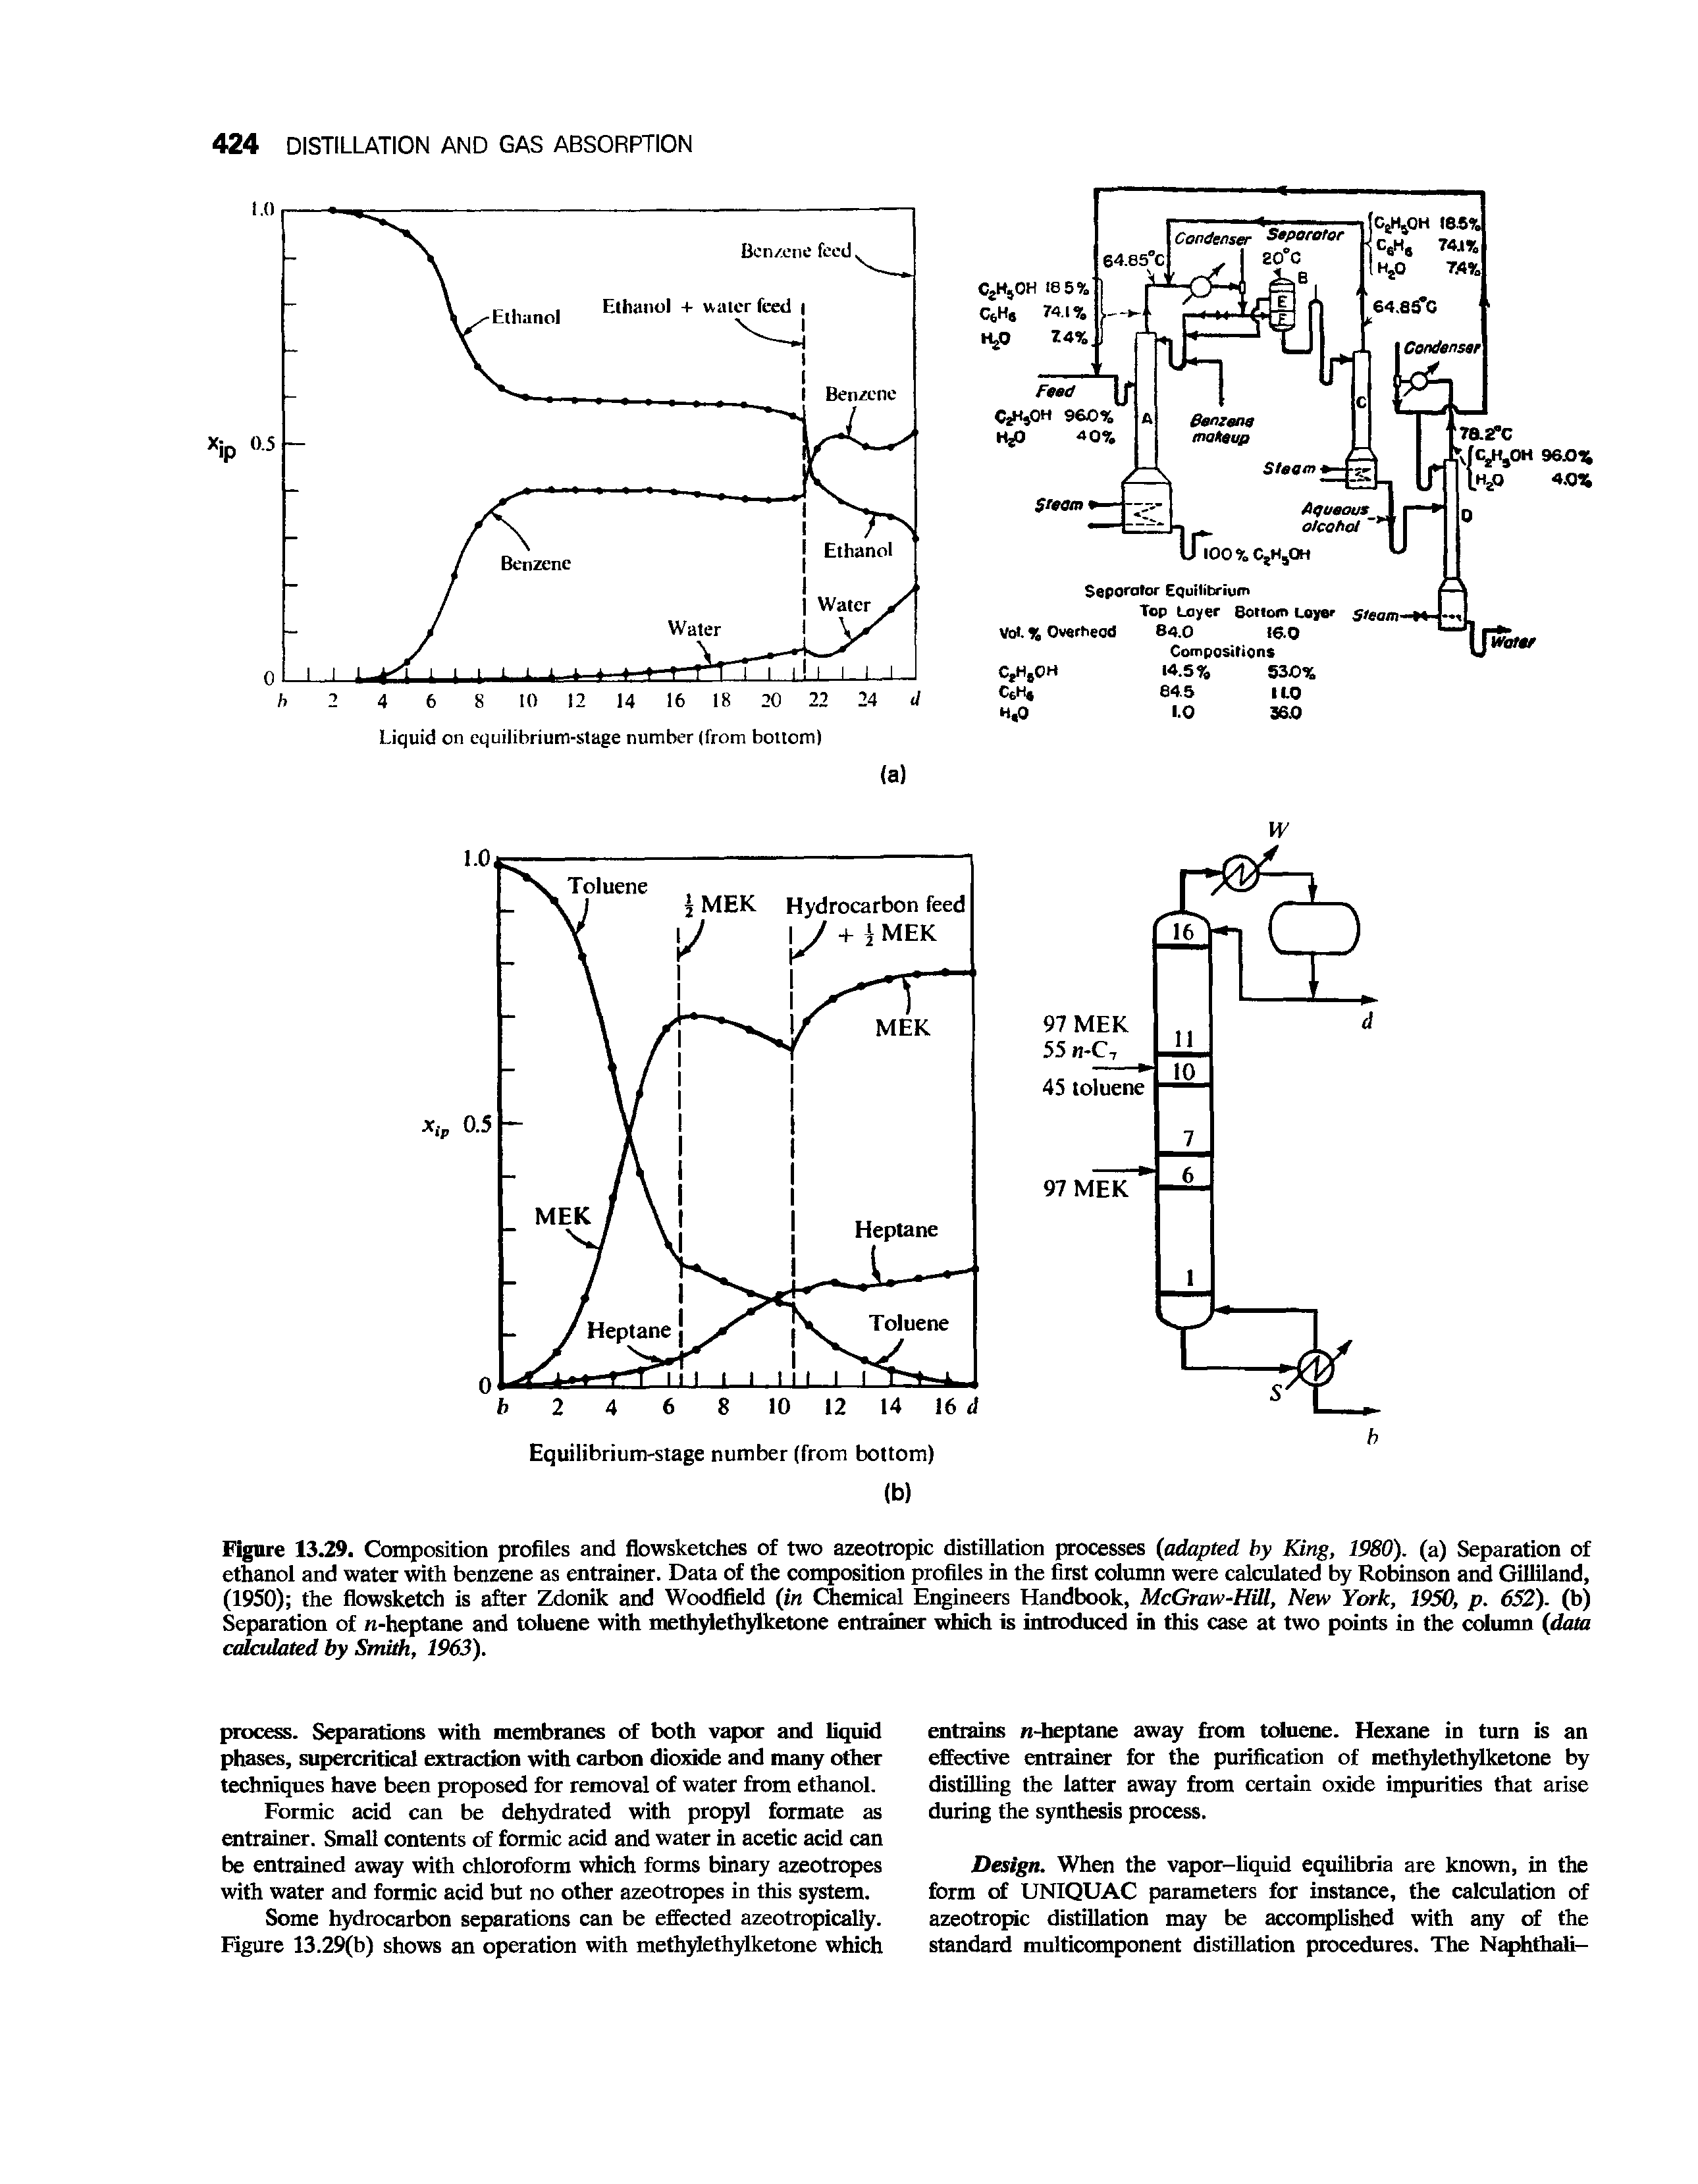 Figure 13.29. Composition profiles and flowsketches of two azeotropic distillation processes (adapted by King, 1980). (a) Separation of ethanol and water with benzene as entrainer. Data of the composition profiles in the first column were calculated by Robinson and Gilliland, (1950) the flowsketch is after Zdonik and Woodfield (in Chemical Engineers Handbook, McGraw-Hill, New York, 1950, p. 652). (b) Separation of n-heptane and toluene with methylethylketone entrainer which is introduced in this case at two points in the column (data calculated by Smith, 1963).